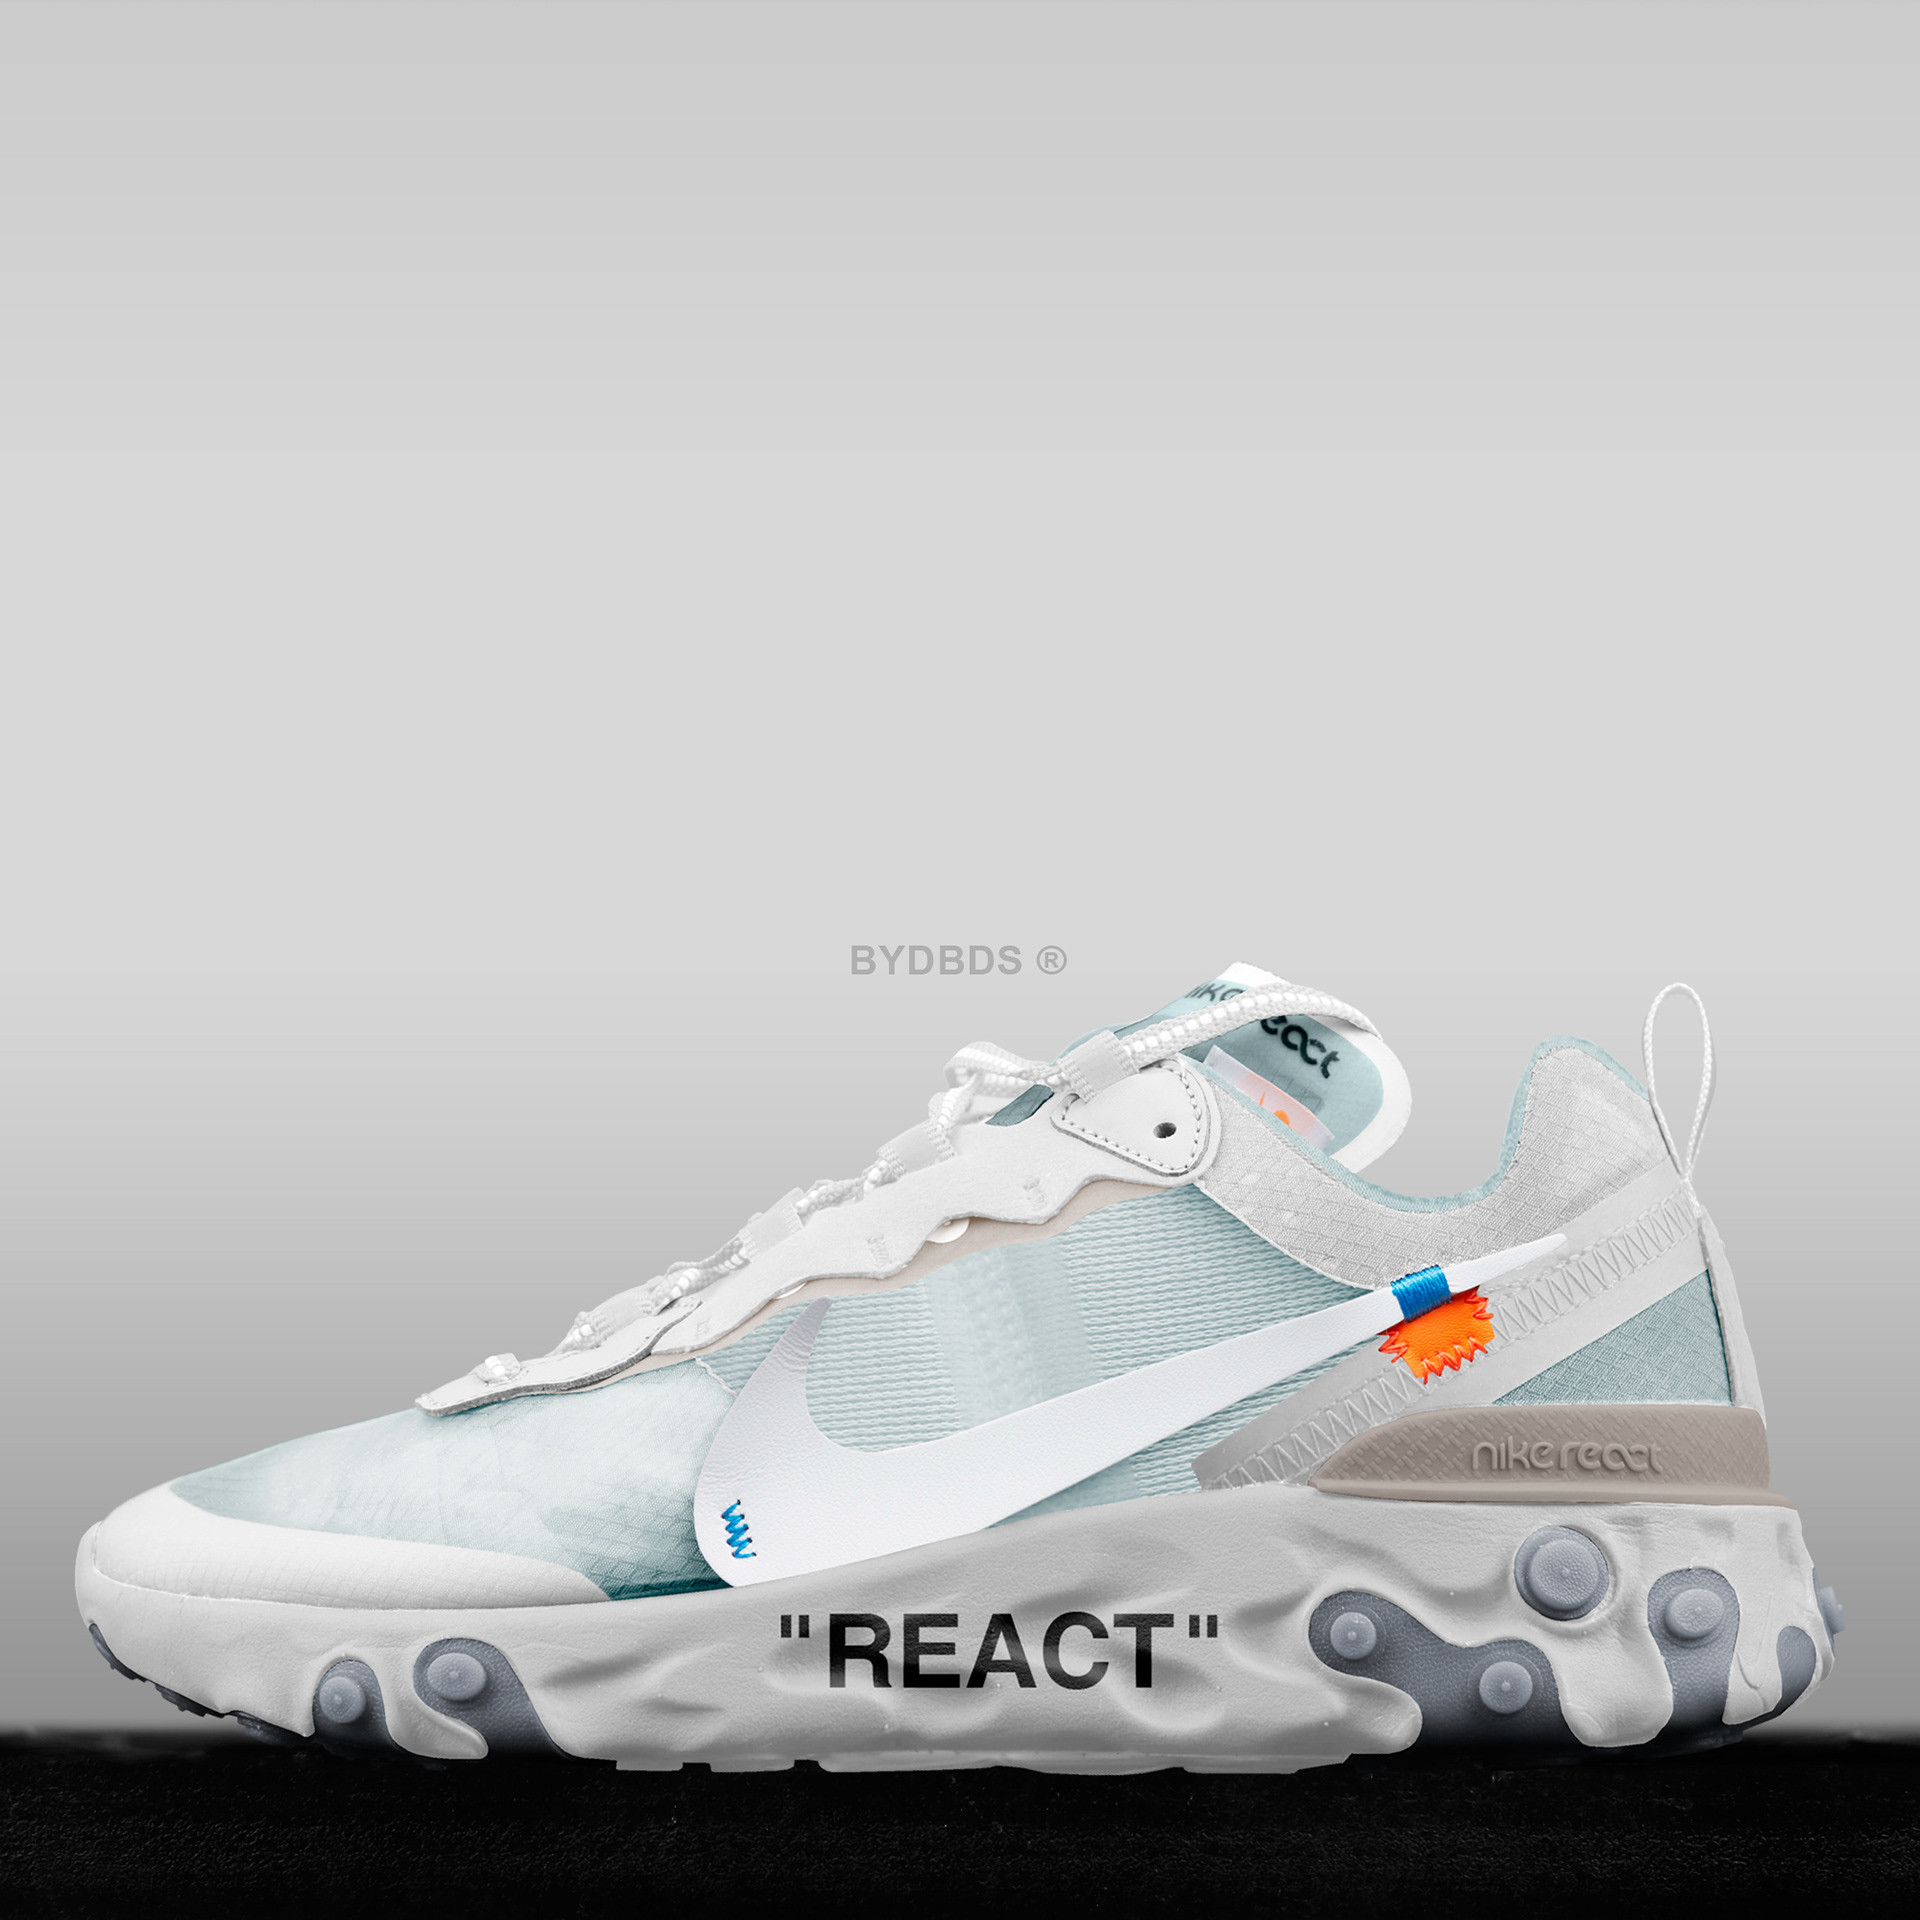 lineal diccionario Sembrar BYDBDS - Nike React Element 87 x Off-White Concept byDBDS®